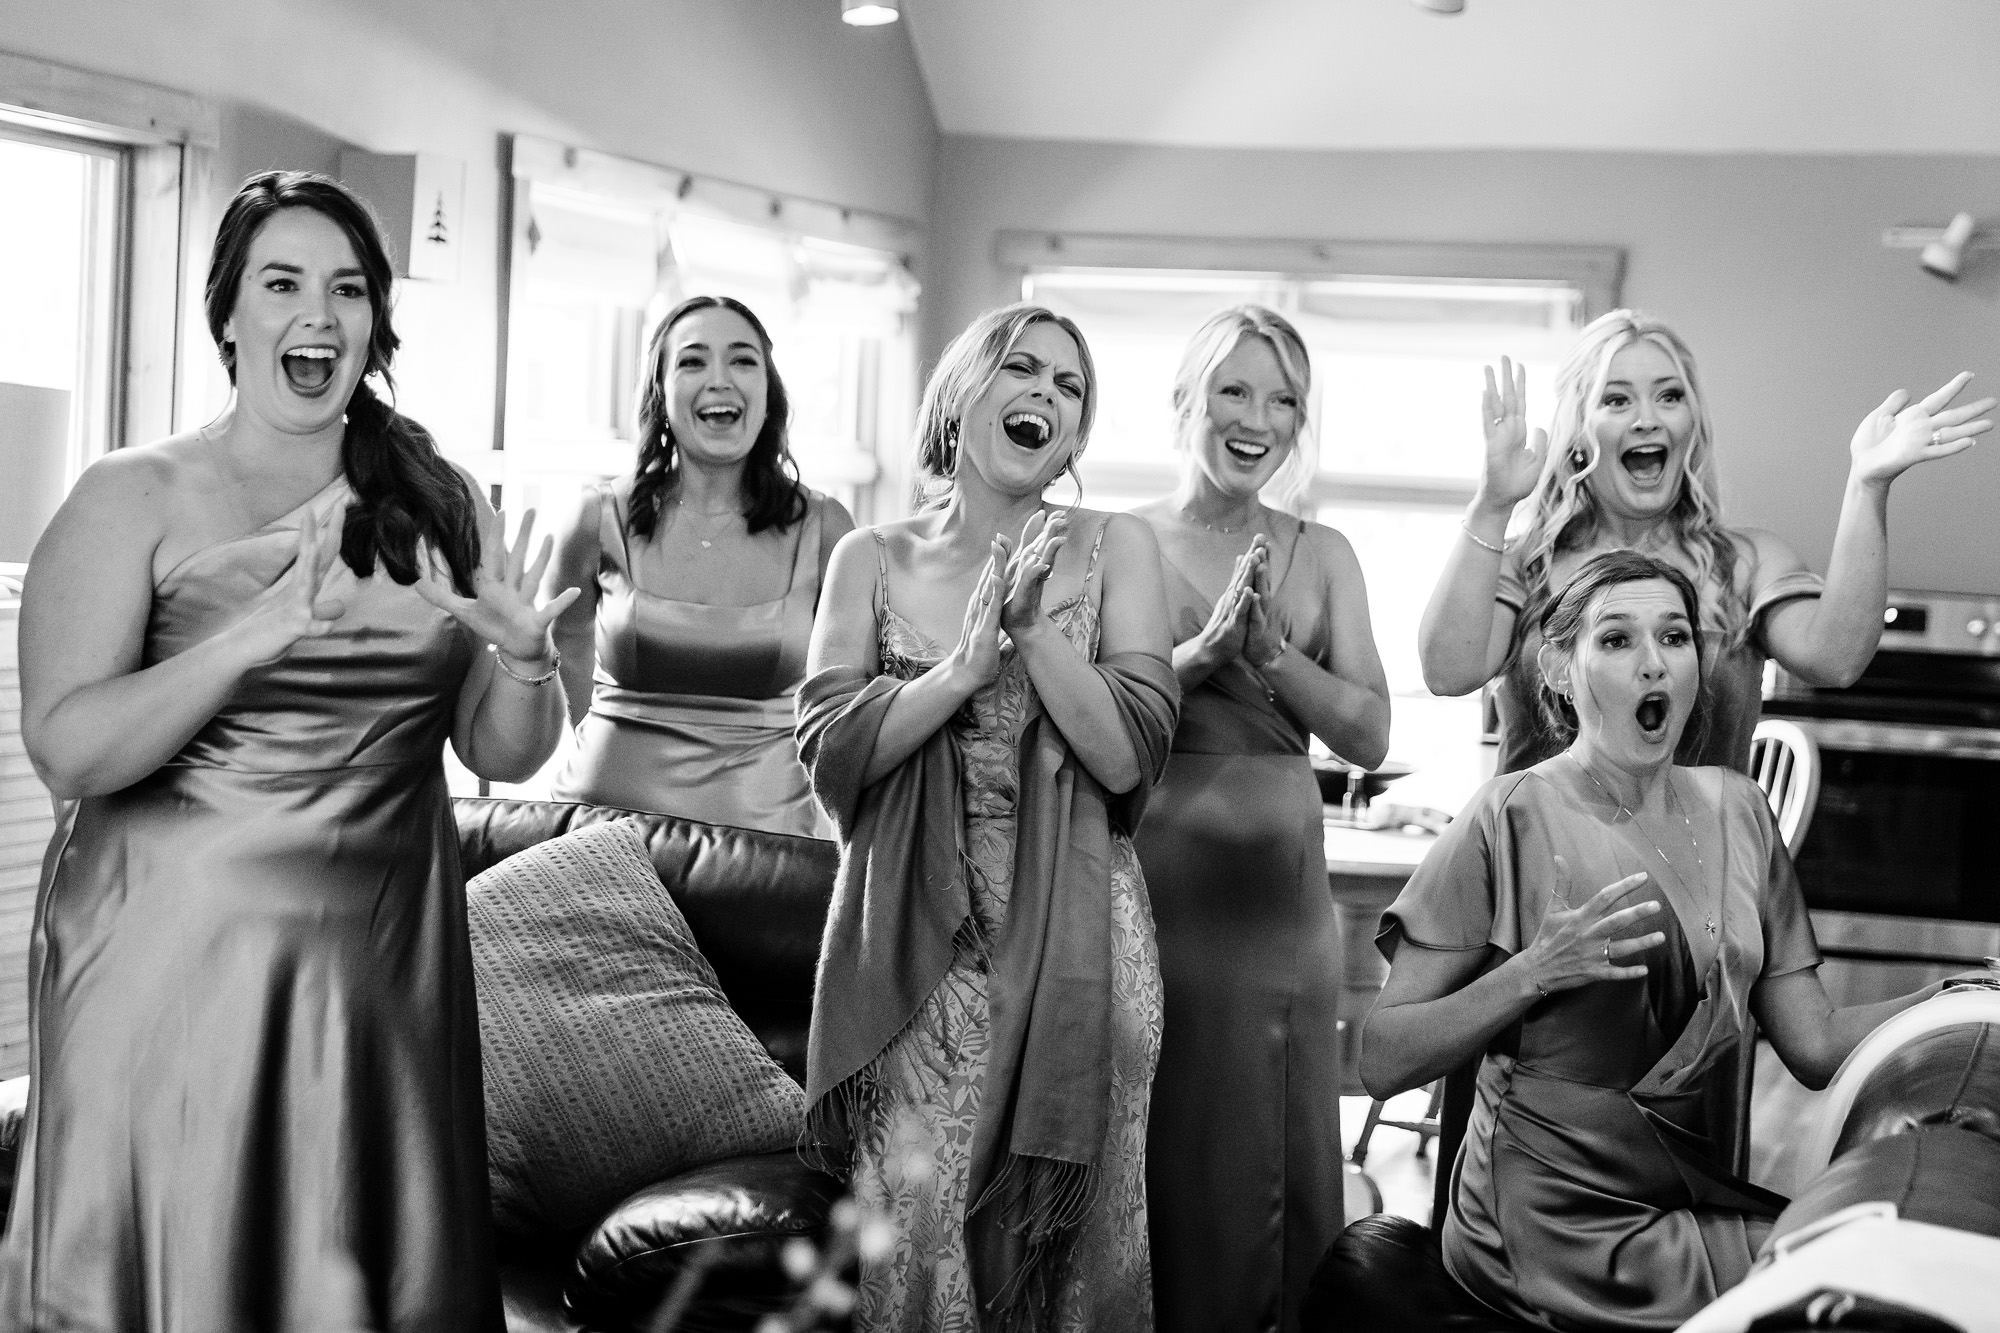 Bridesmaids react enthusiastically when they see the bride for the first time in her wedding dress.